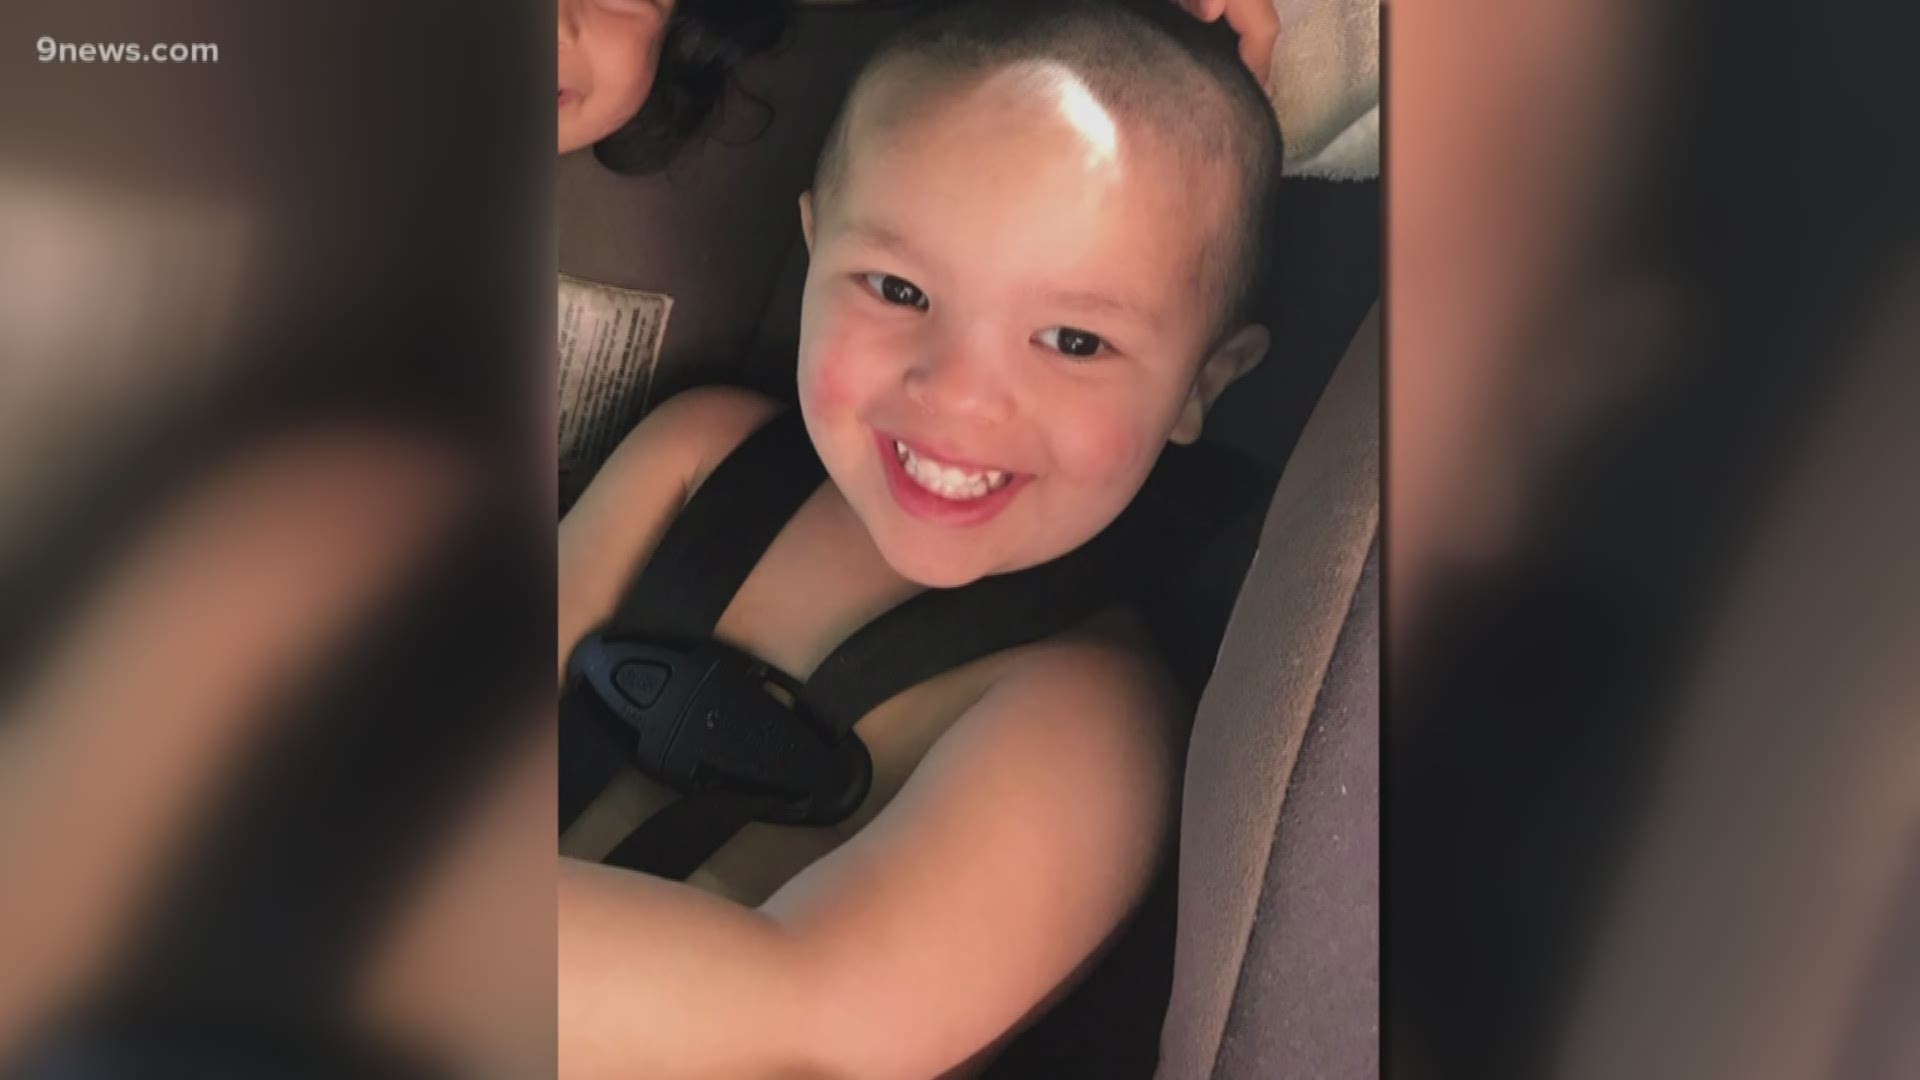 Oregon police and the FBI were searching for the boy after his parents died in an apparent murder-suicide last week in Montana.